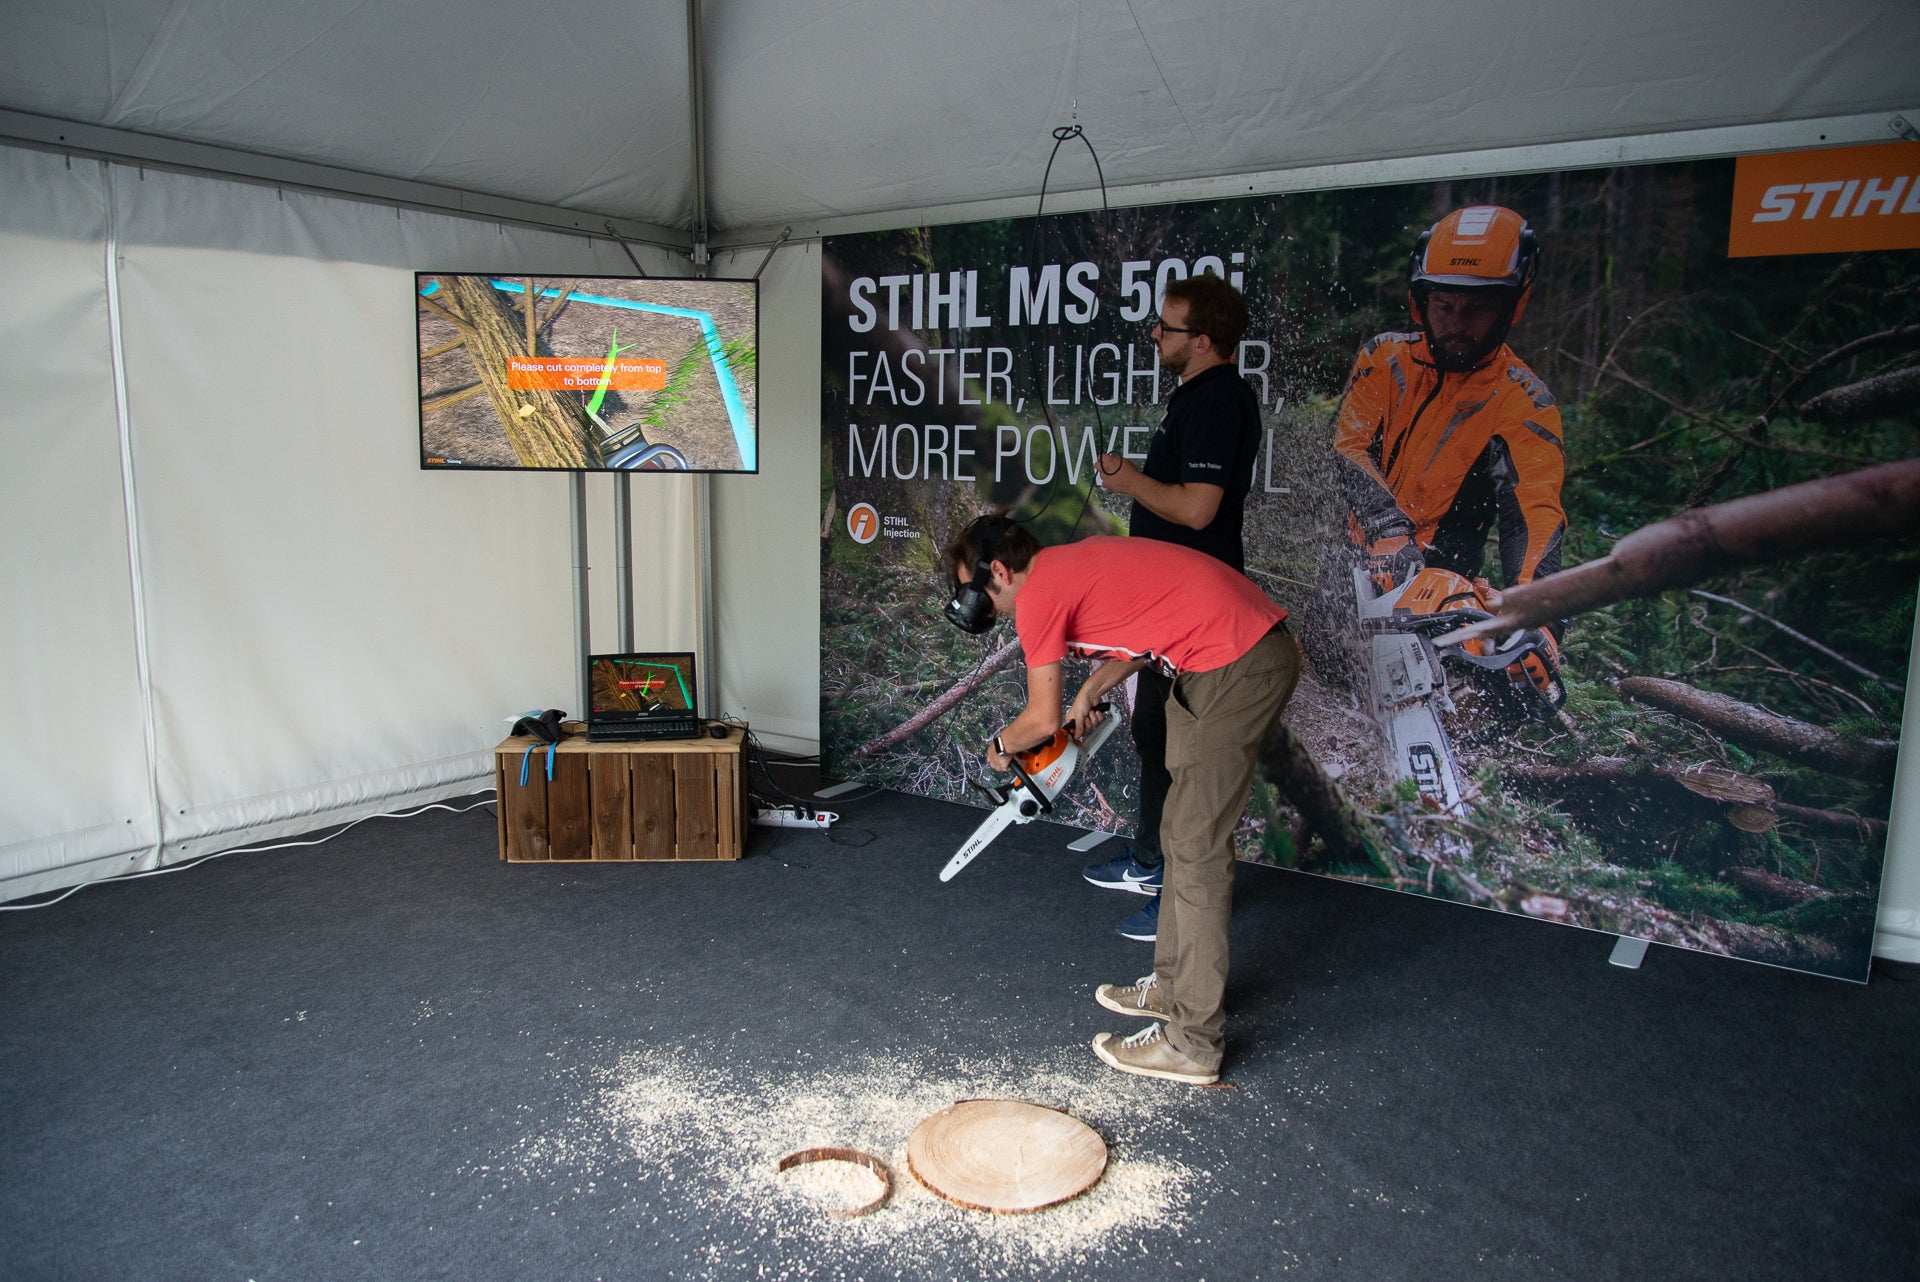 Stihl Chainsaw VR in use